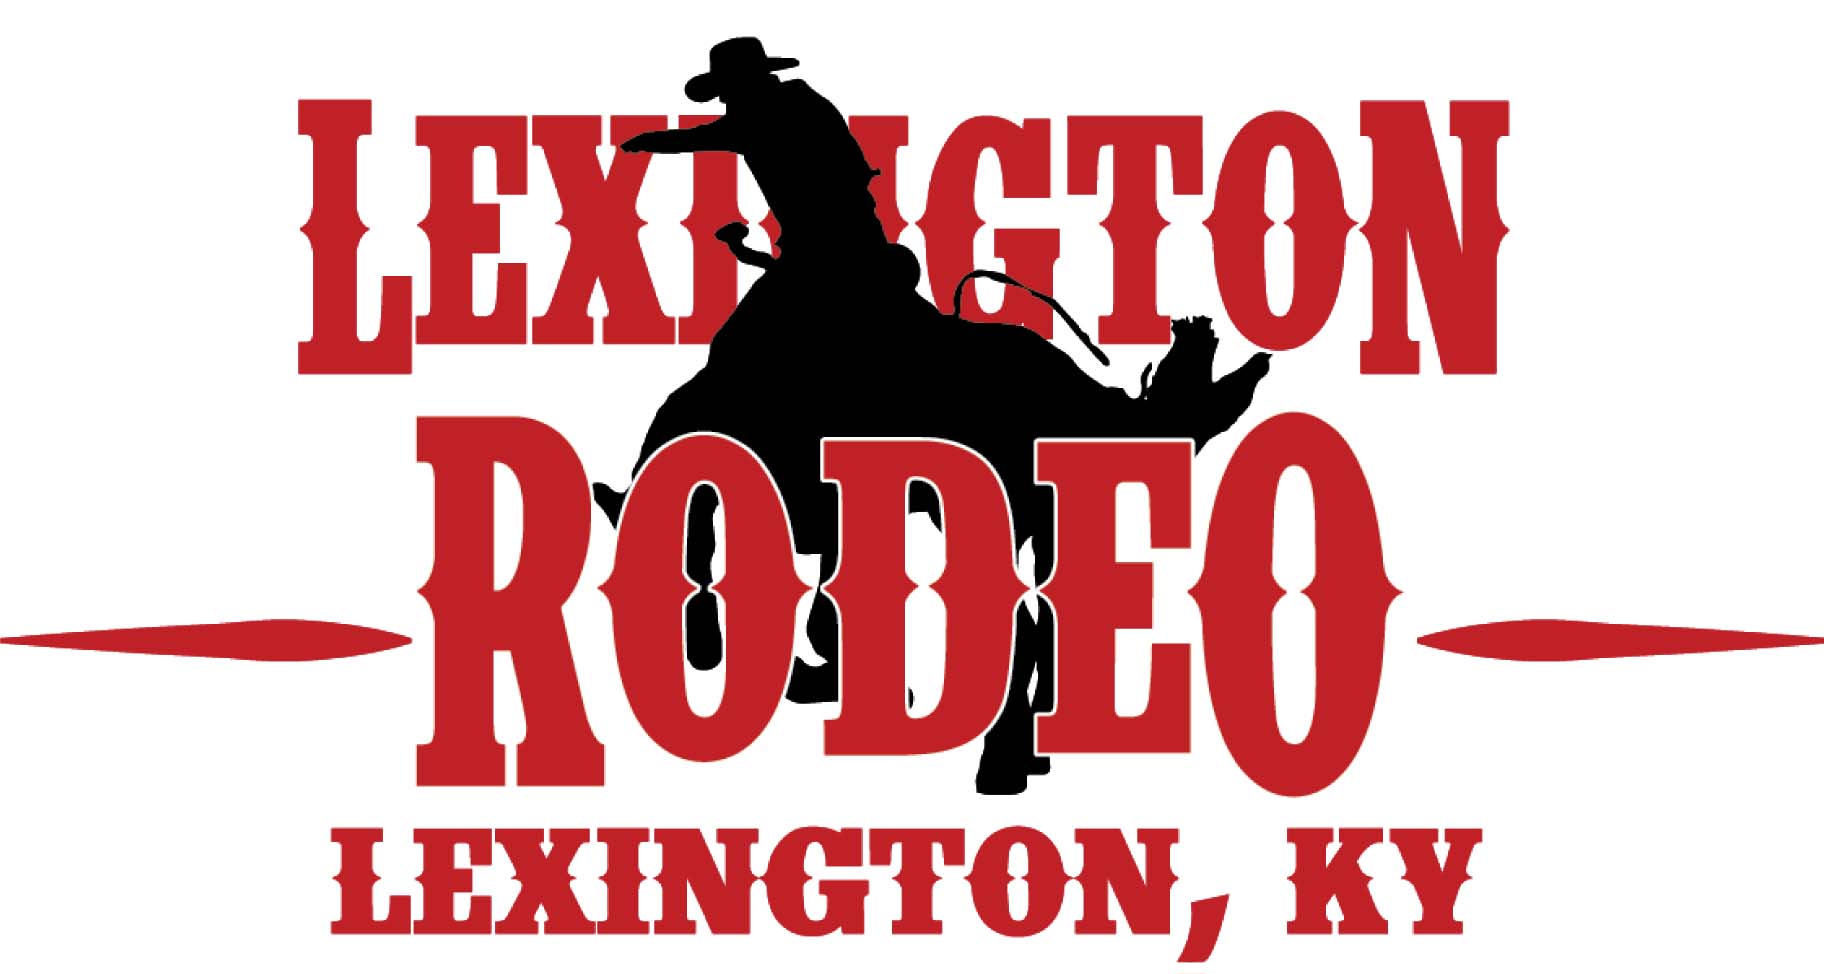 JUNE 13th LEXINGTON RODEO DAY AT ROTARY MEET THE STARS tary Meet the